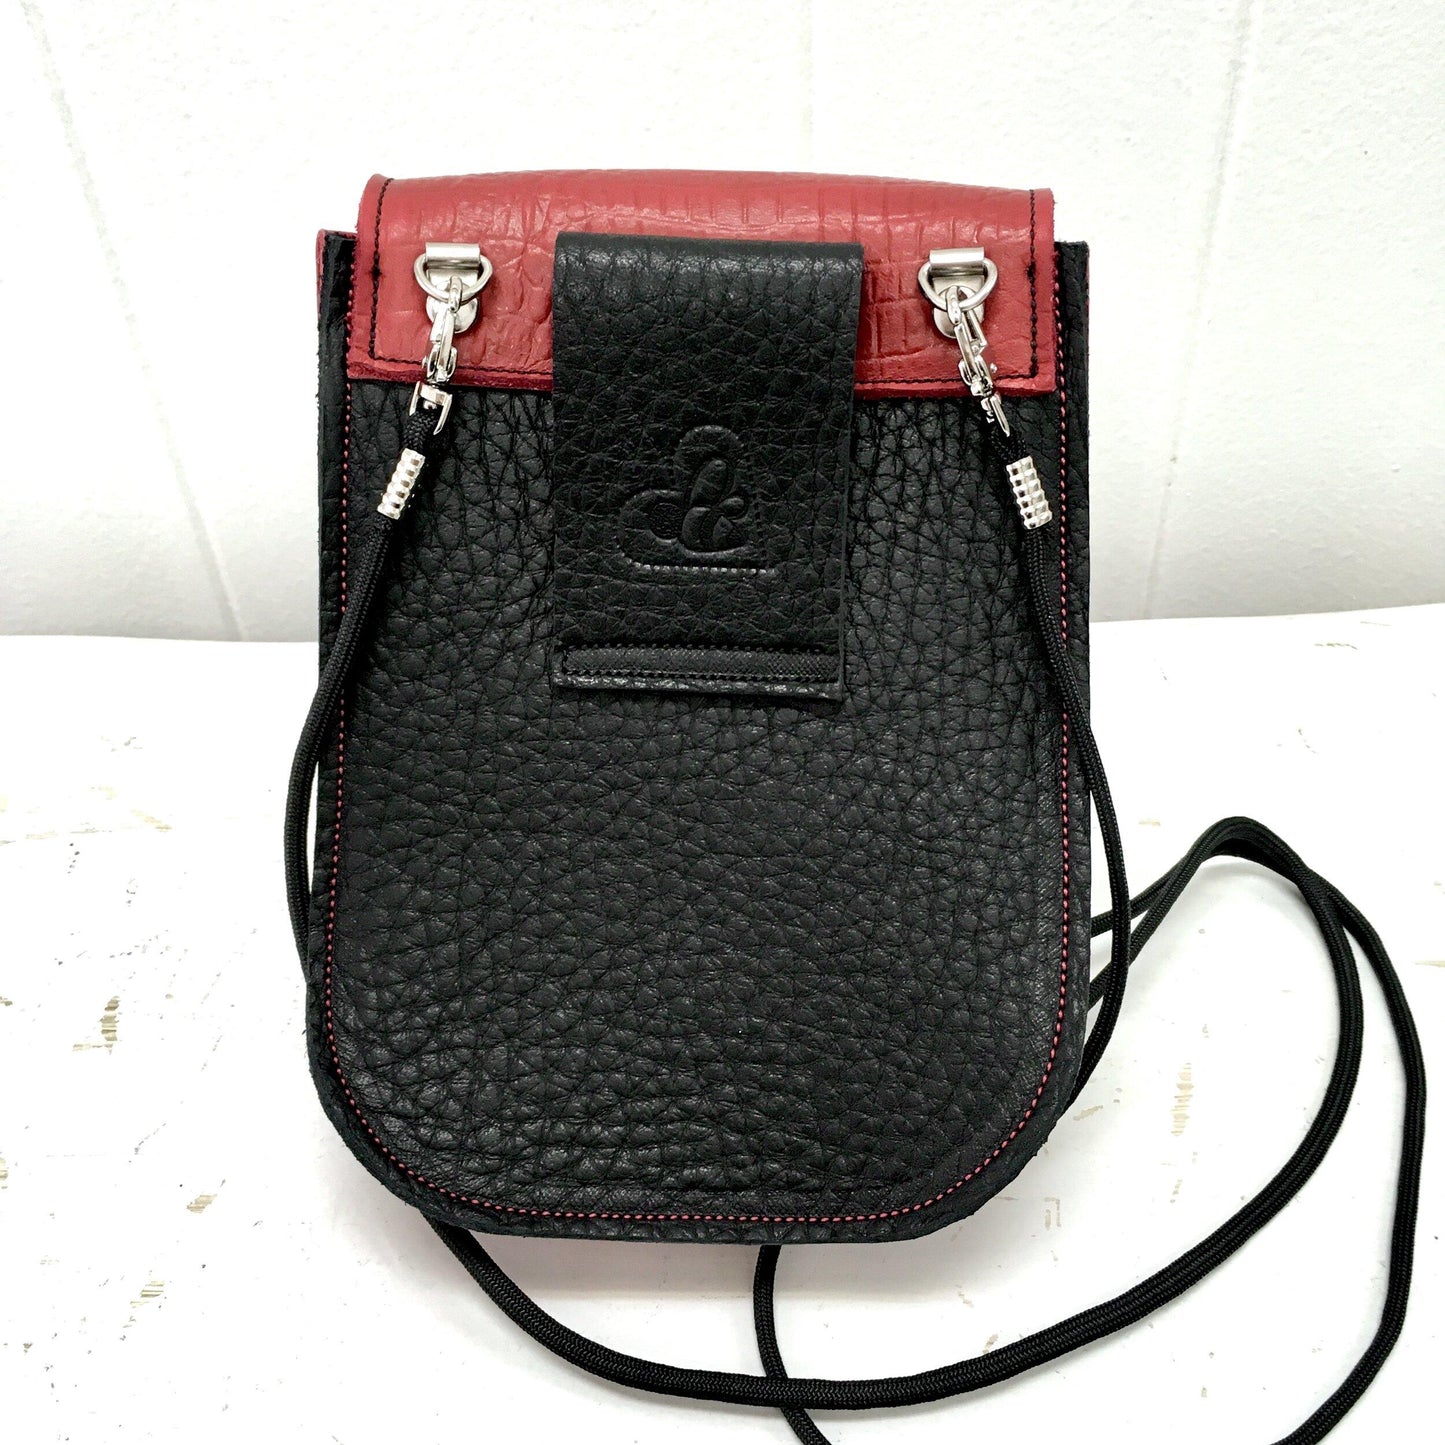 Essentials convertible bag Black with Red flap and side gusset